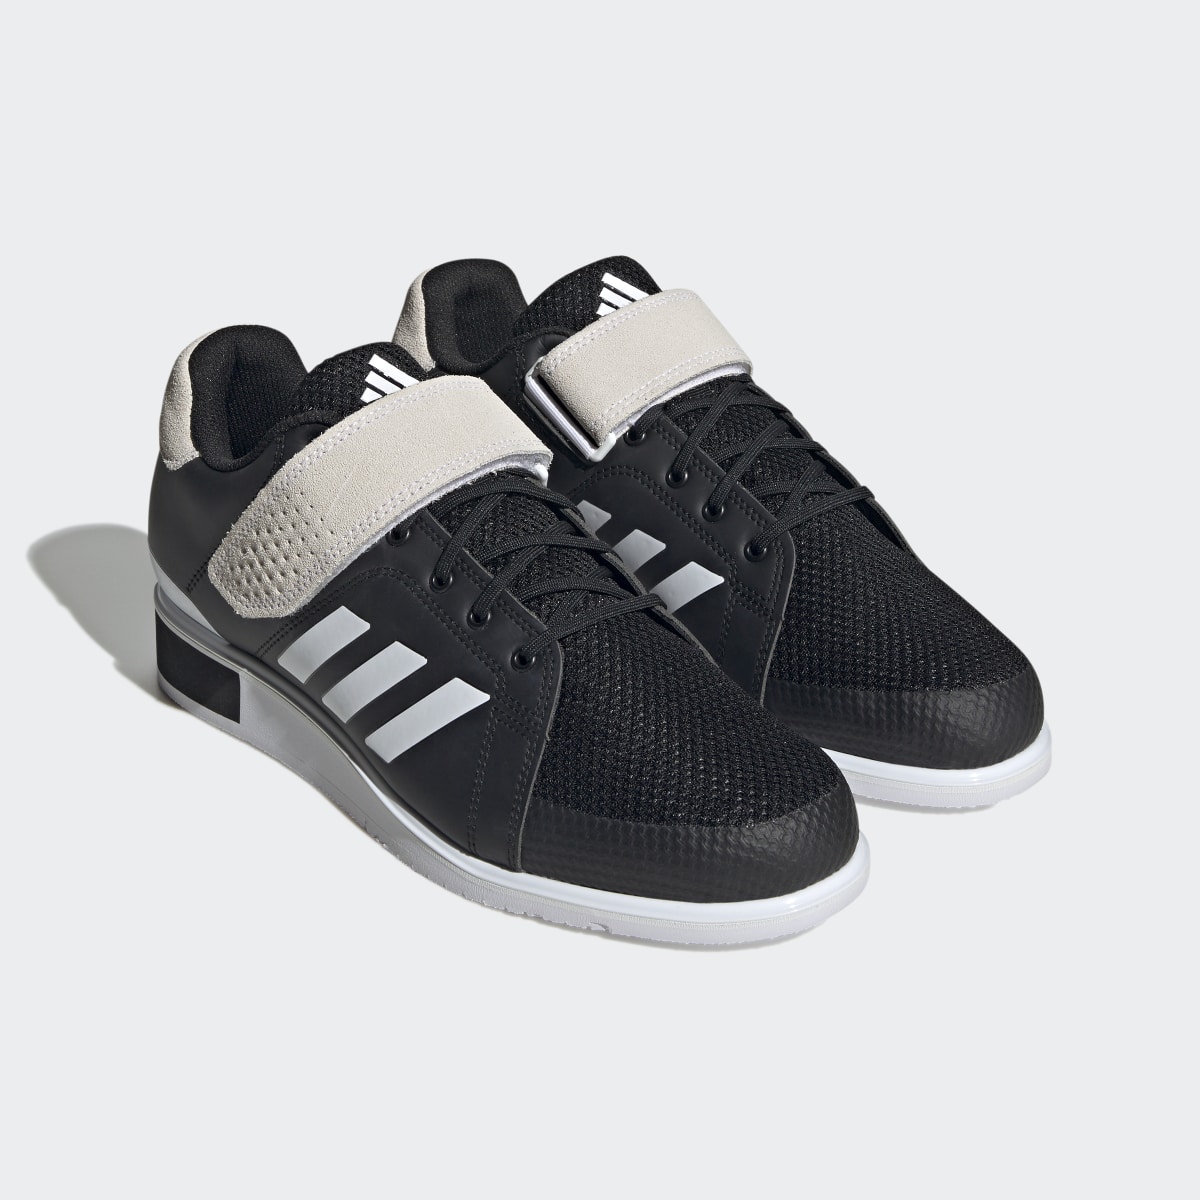 Adidas Power Perfect 3 Tokyo Weightlifting Shoes. 5